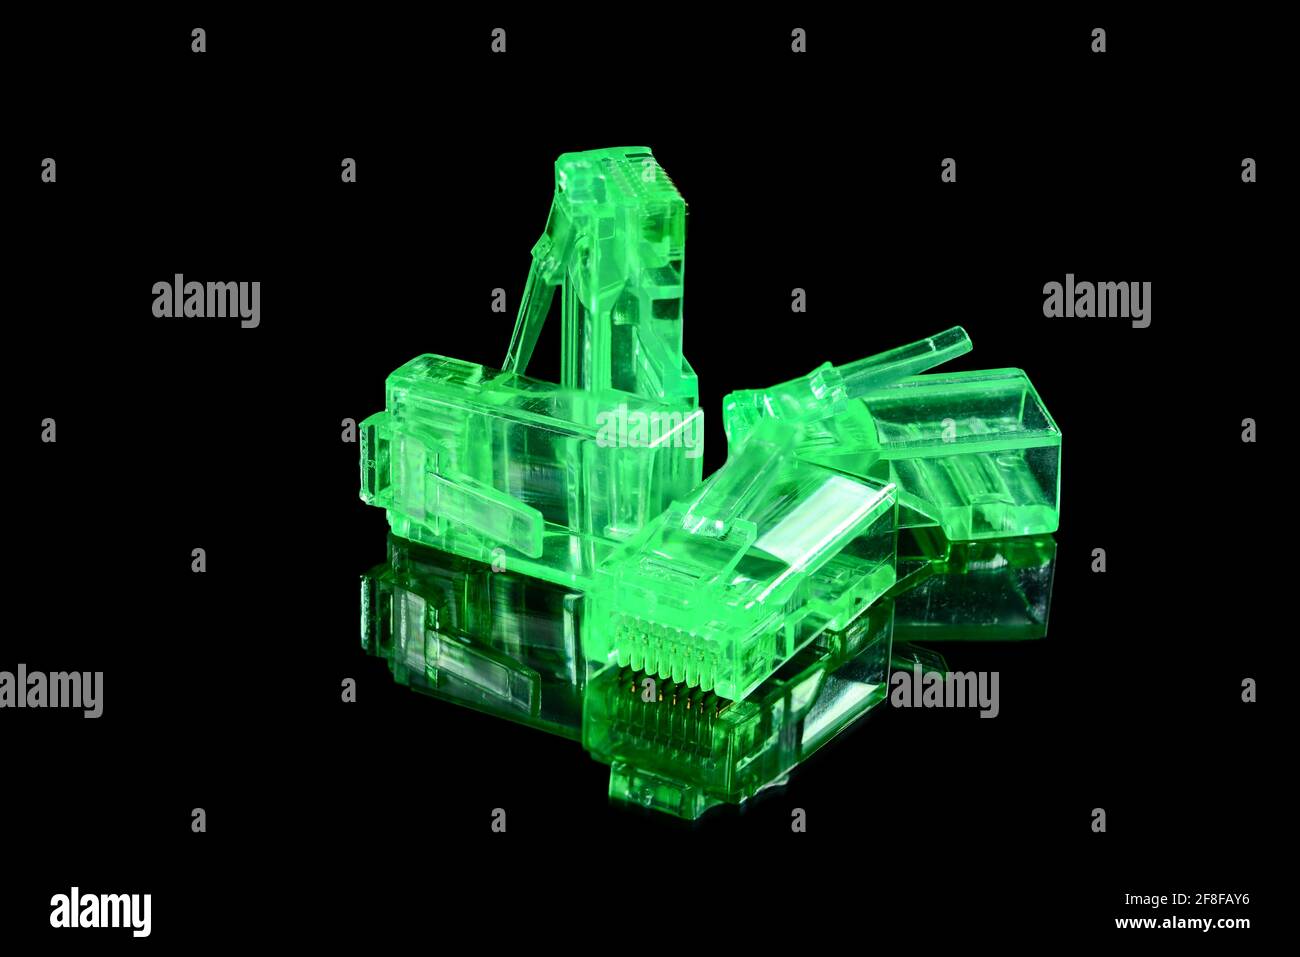 Connector rj-45. Four neon green transparent connectors rj45 for network and internet. Close up macro isolated on black background with reflection. Stock Photo